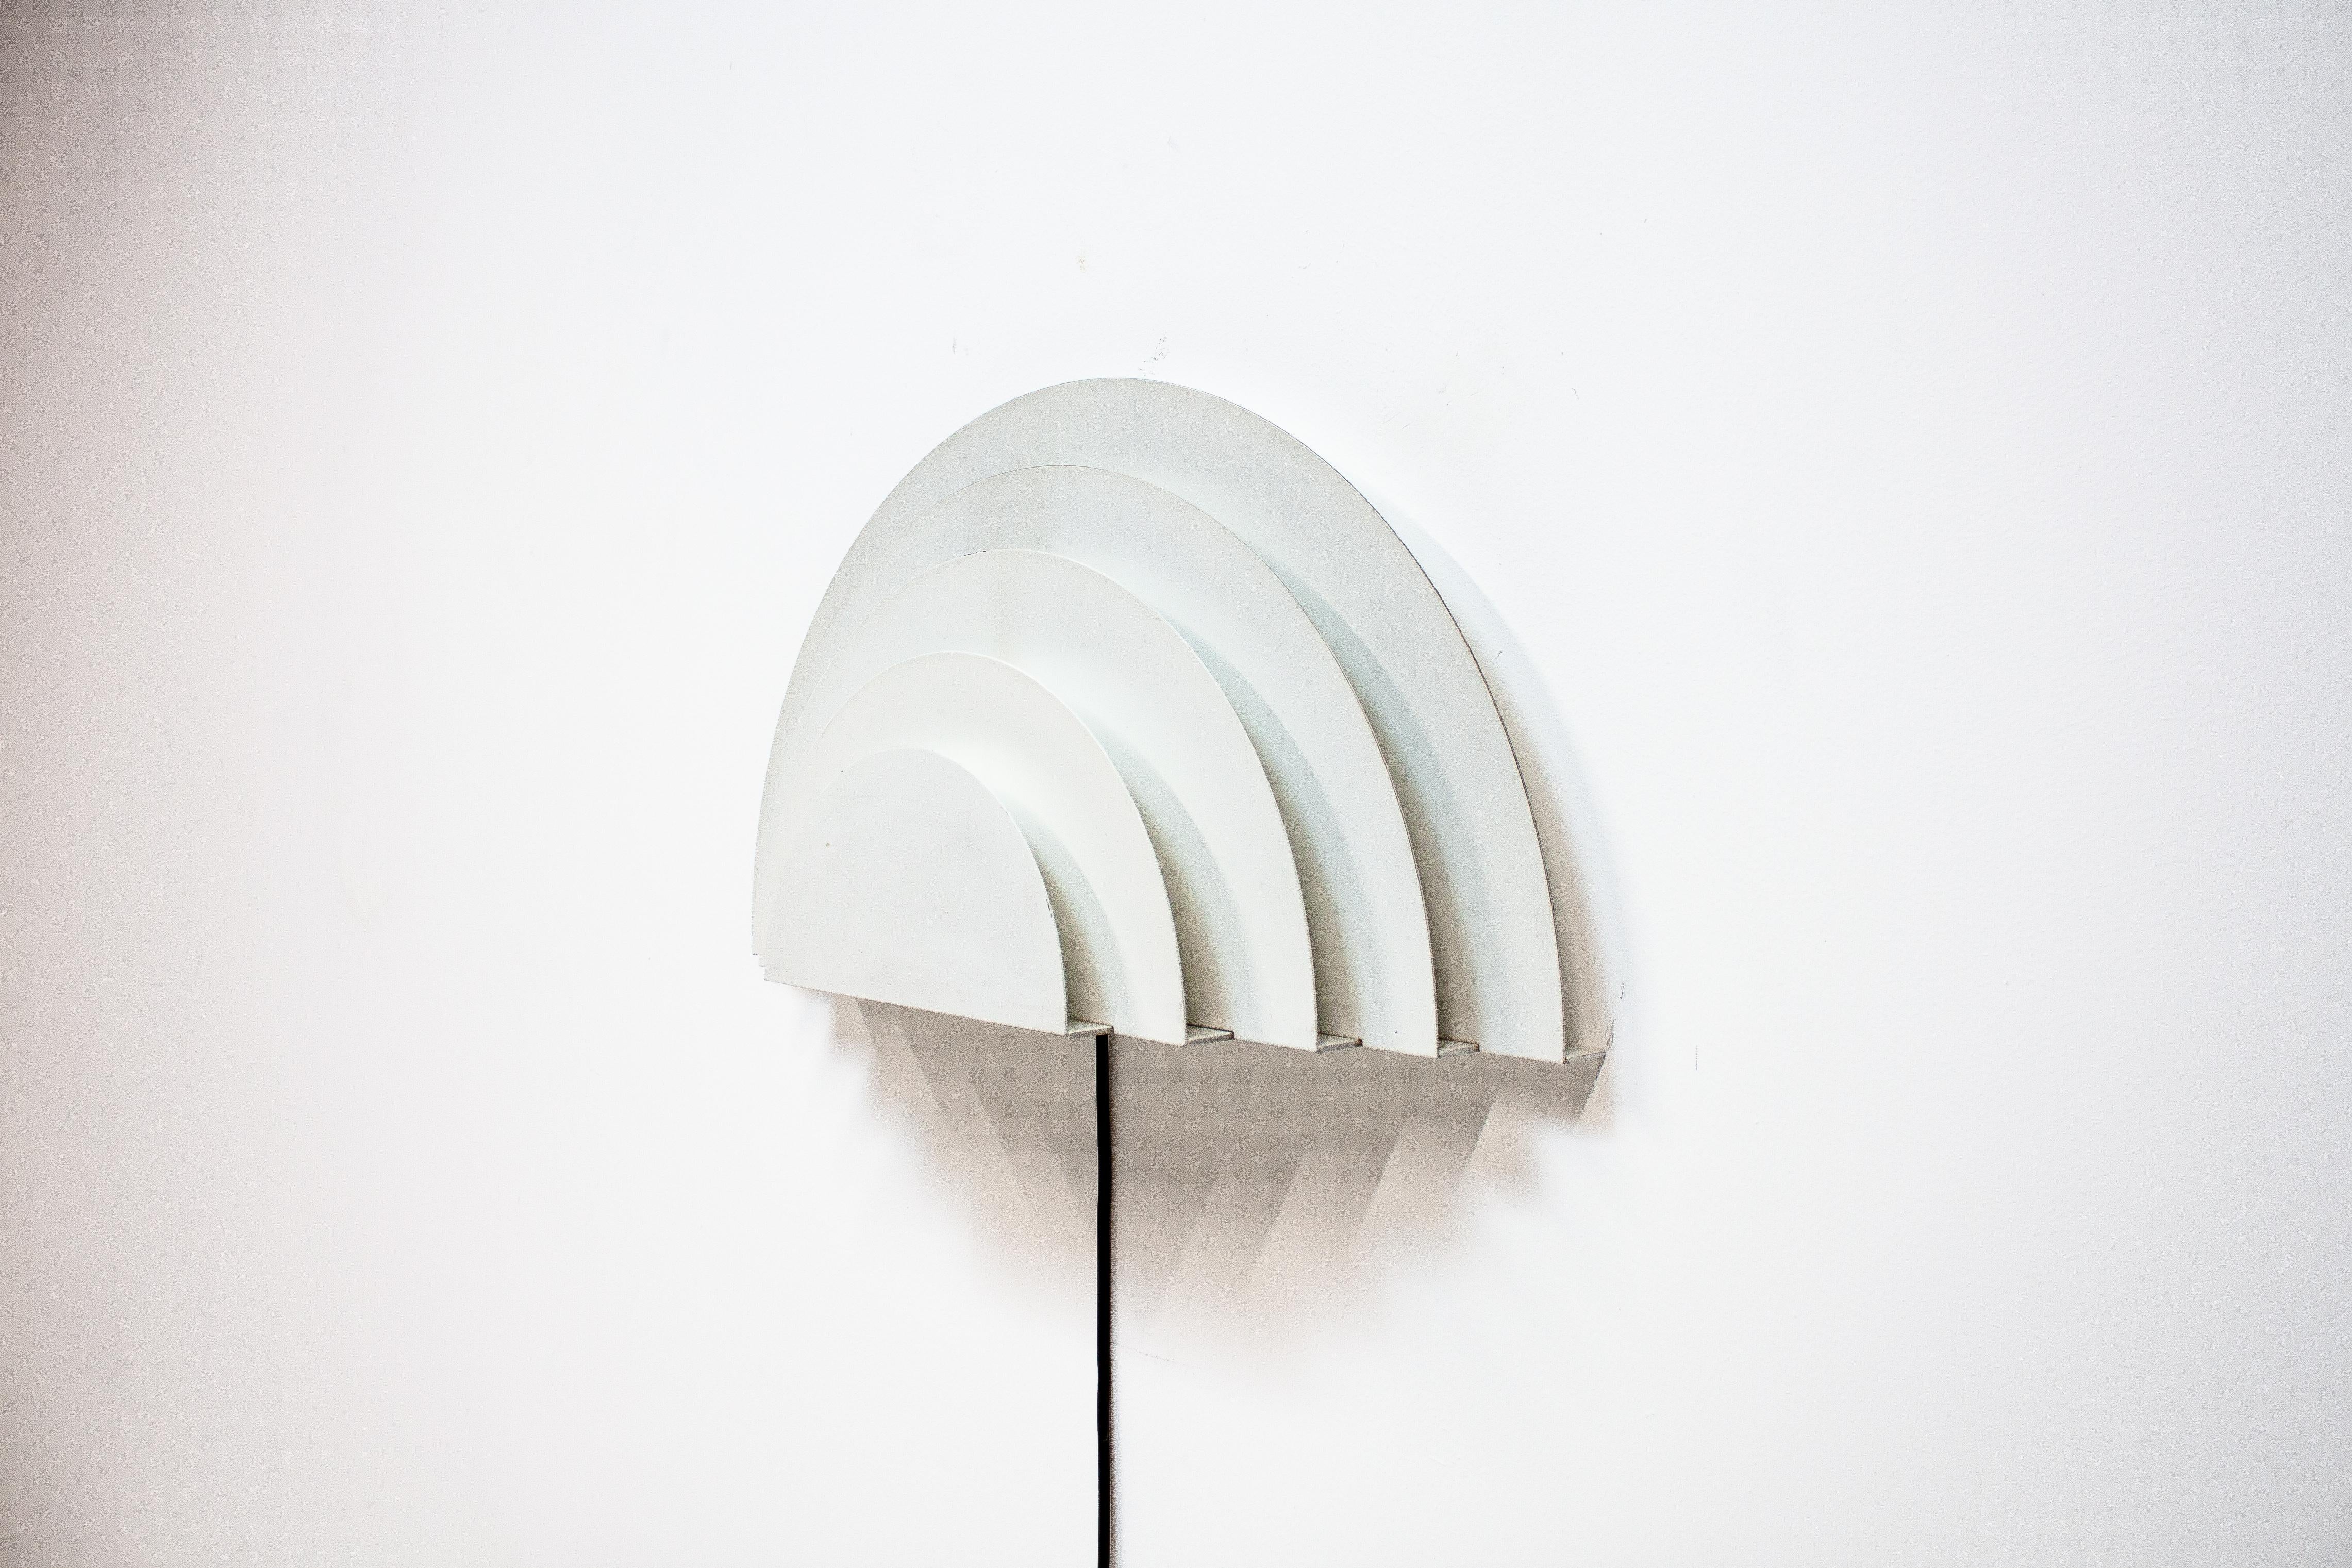 Meander Wall Sconce by Cesare Casati and Emanuele Ponzio for RAAK, Netherlands 2